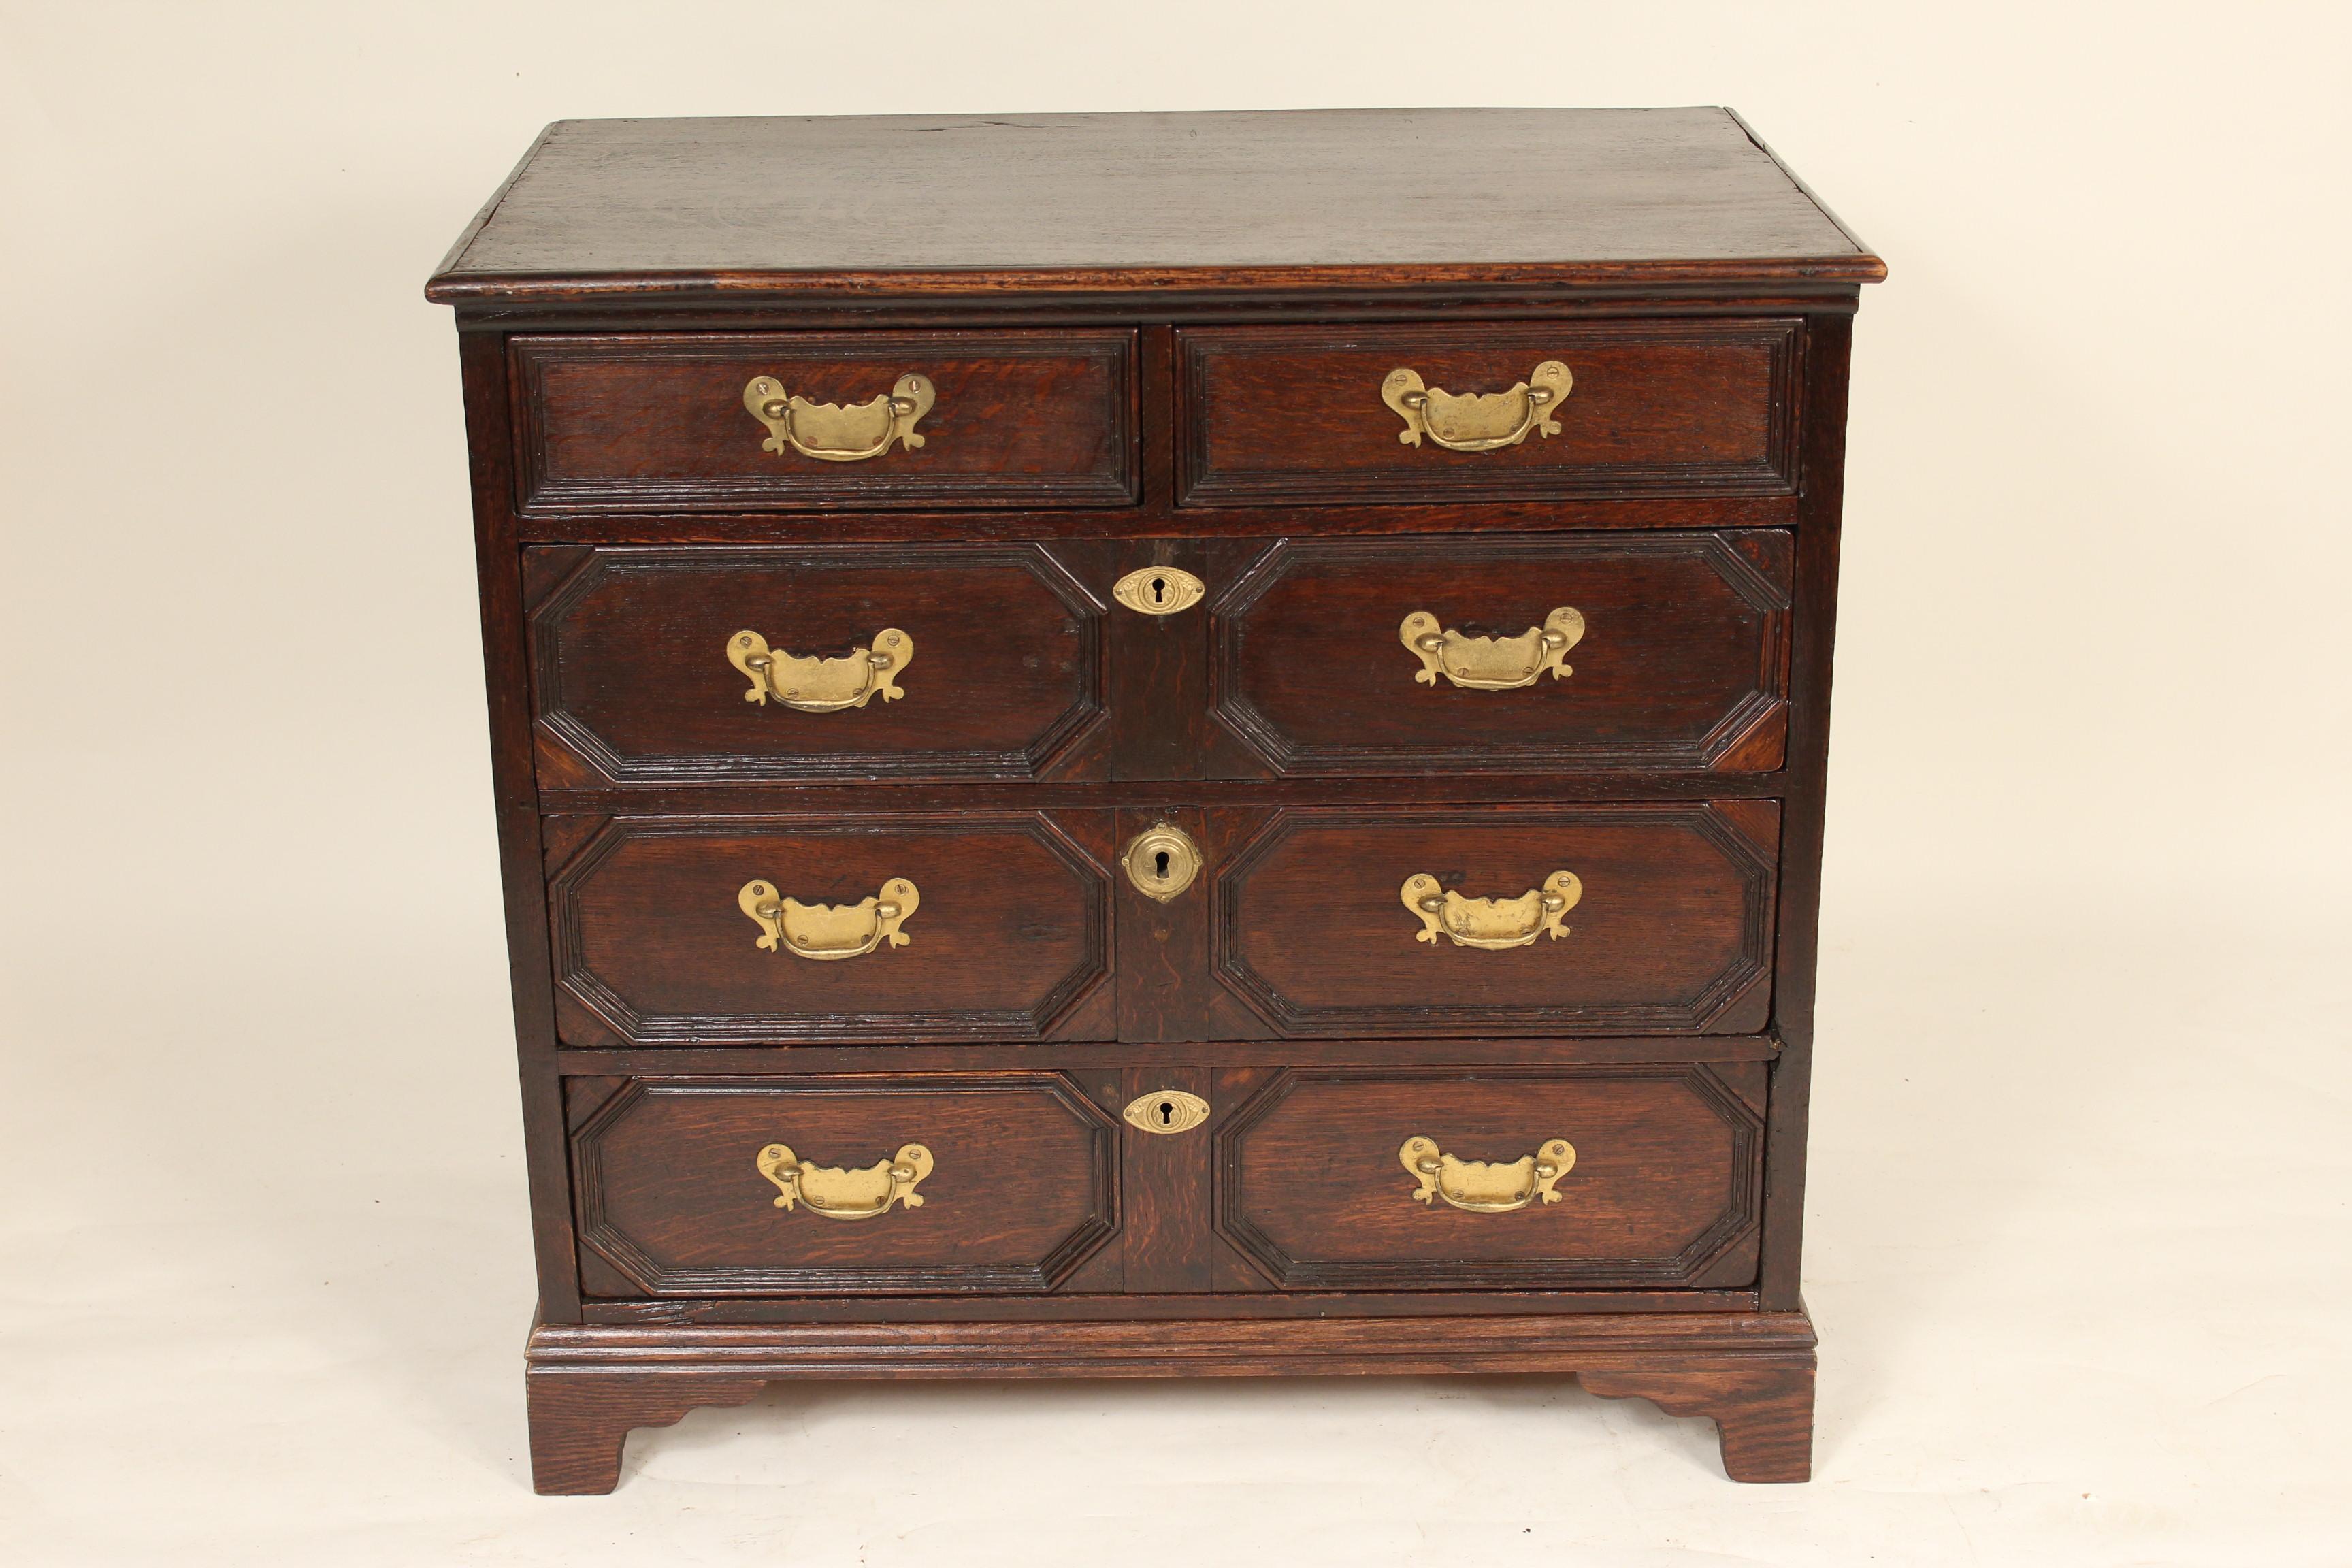 Antique Charles II style oak chest of drawers, 19th century. The base molding and feet are 21st century.